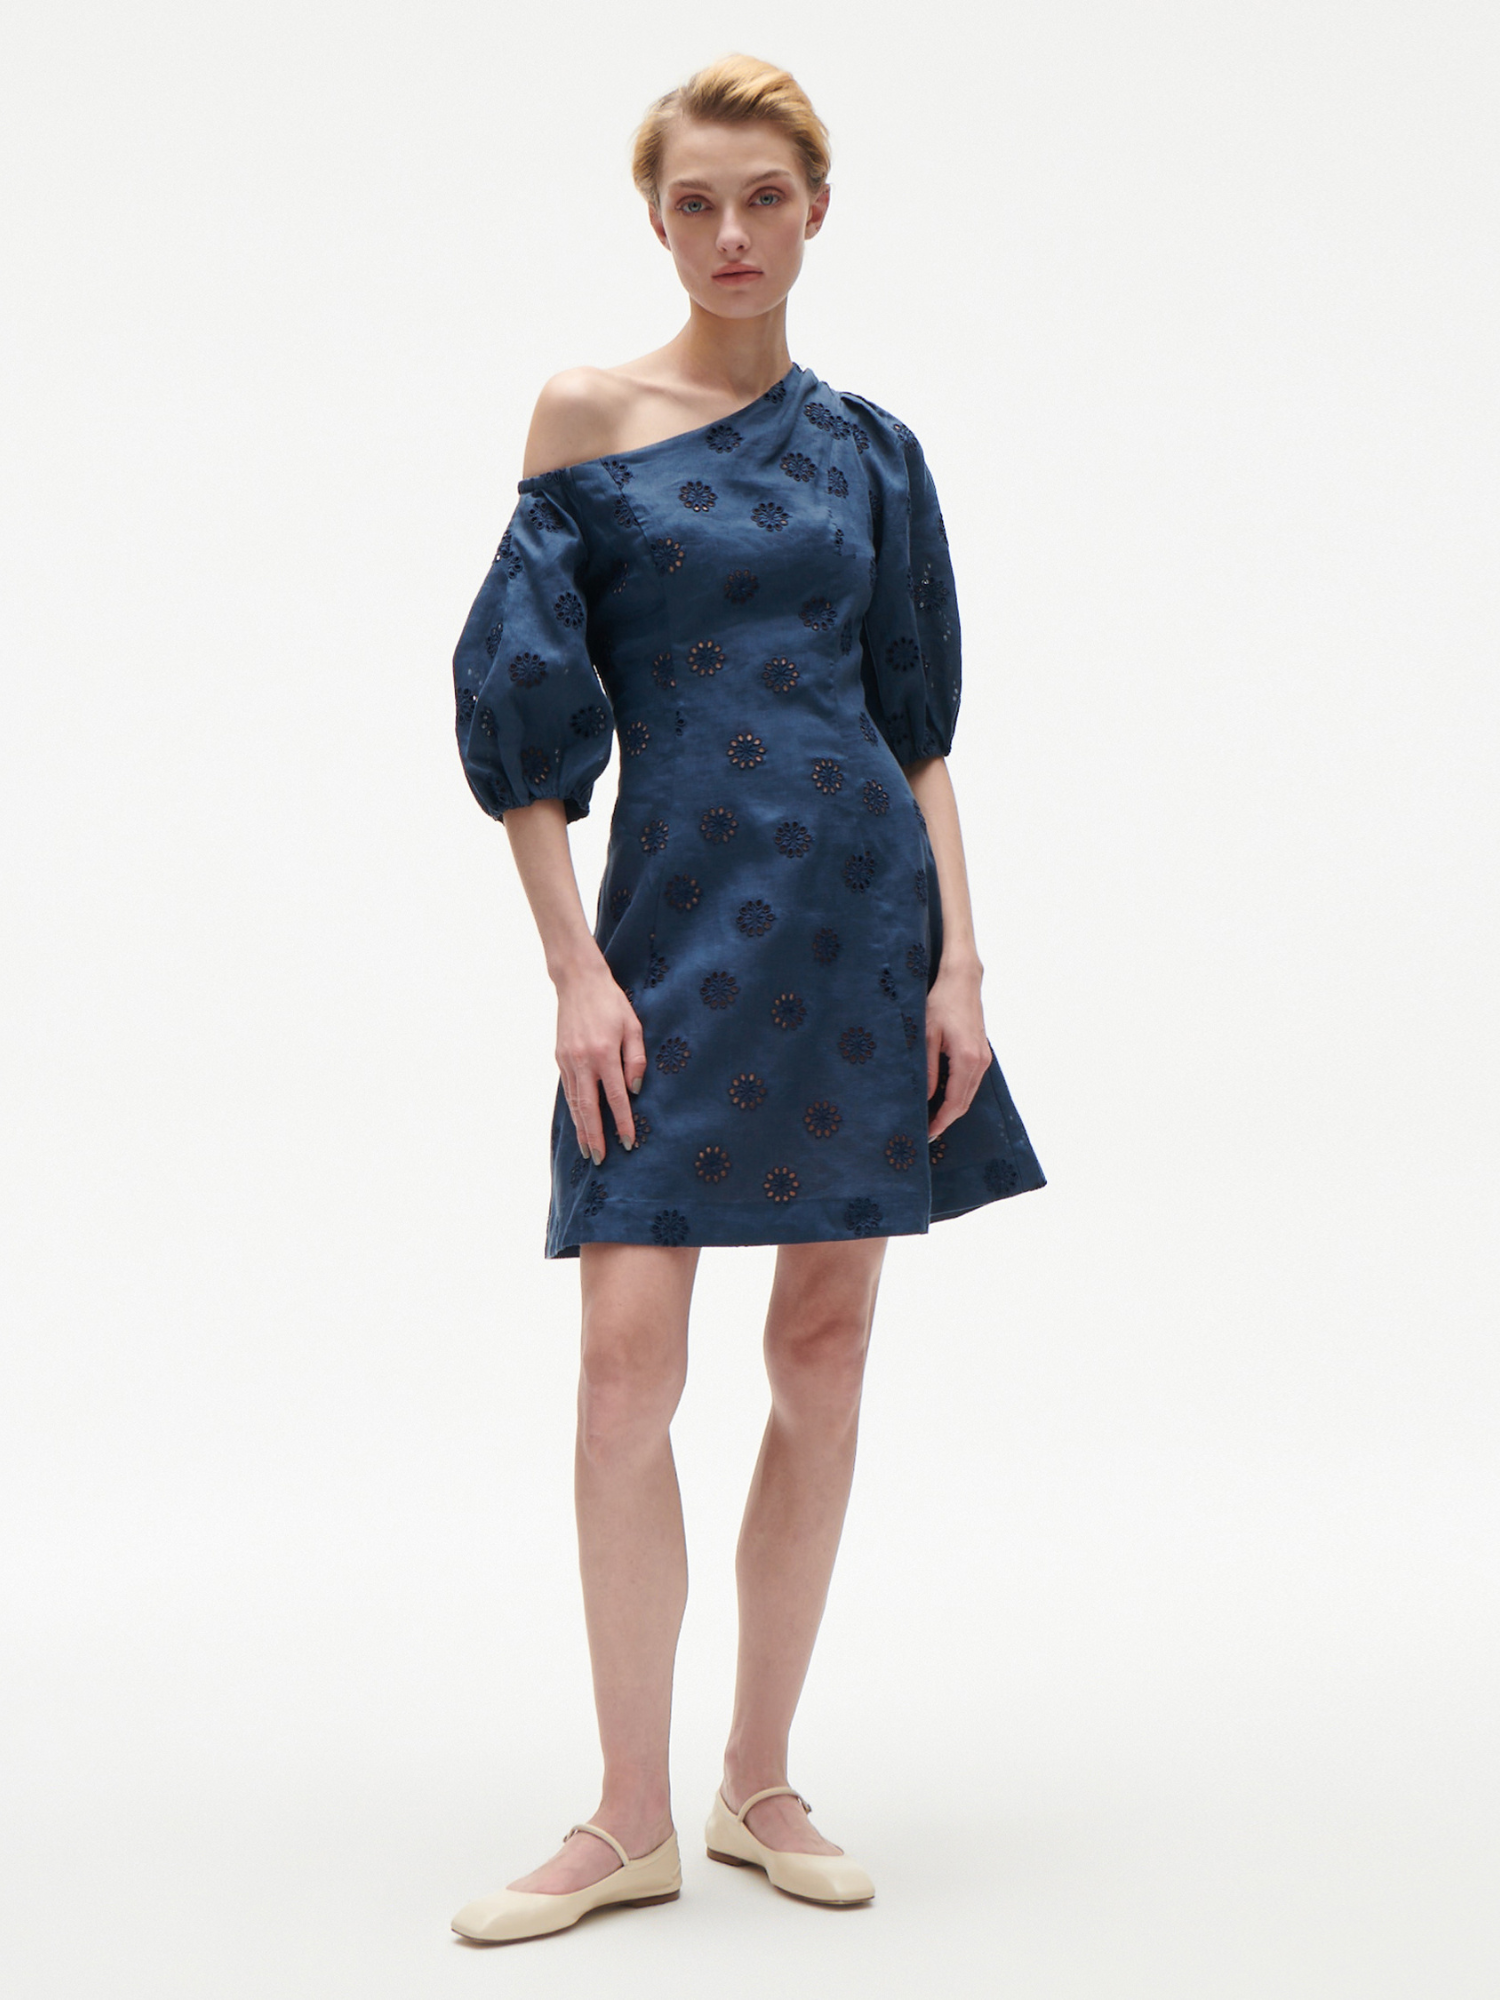 Figue Darcy Dress in Slate Navy